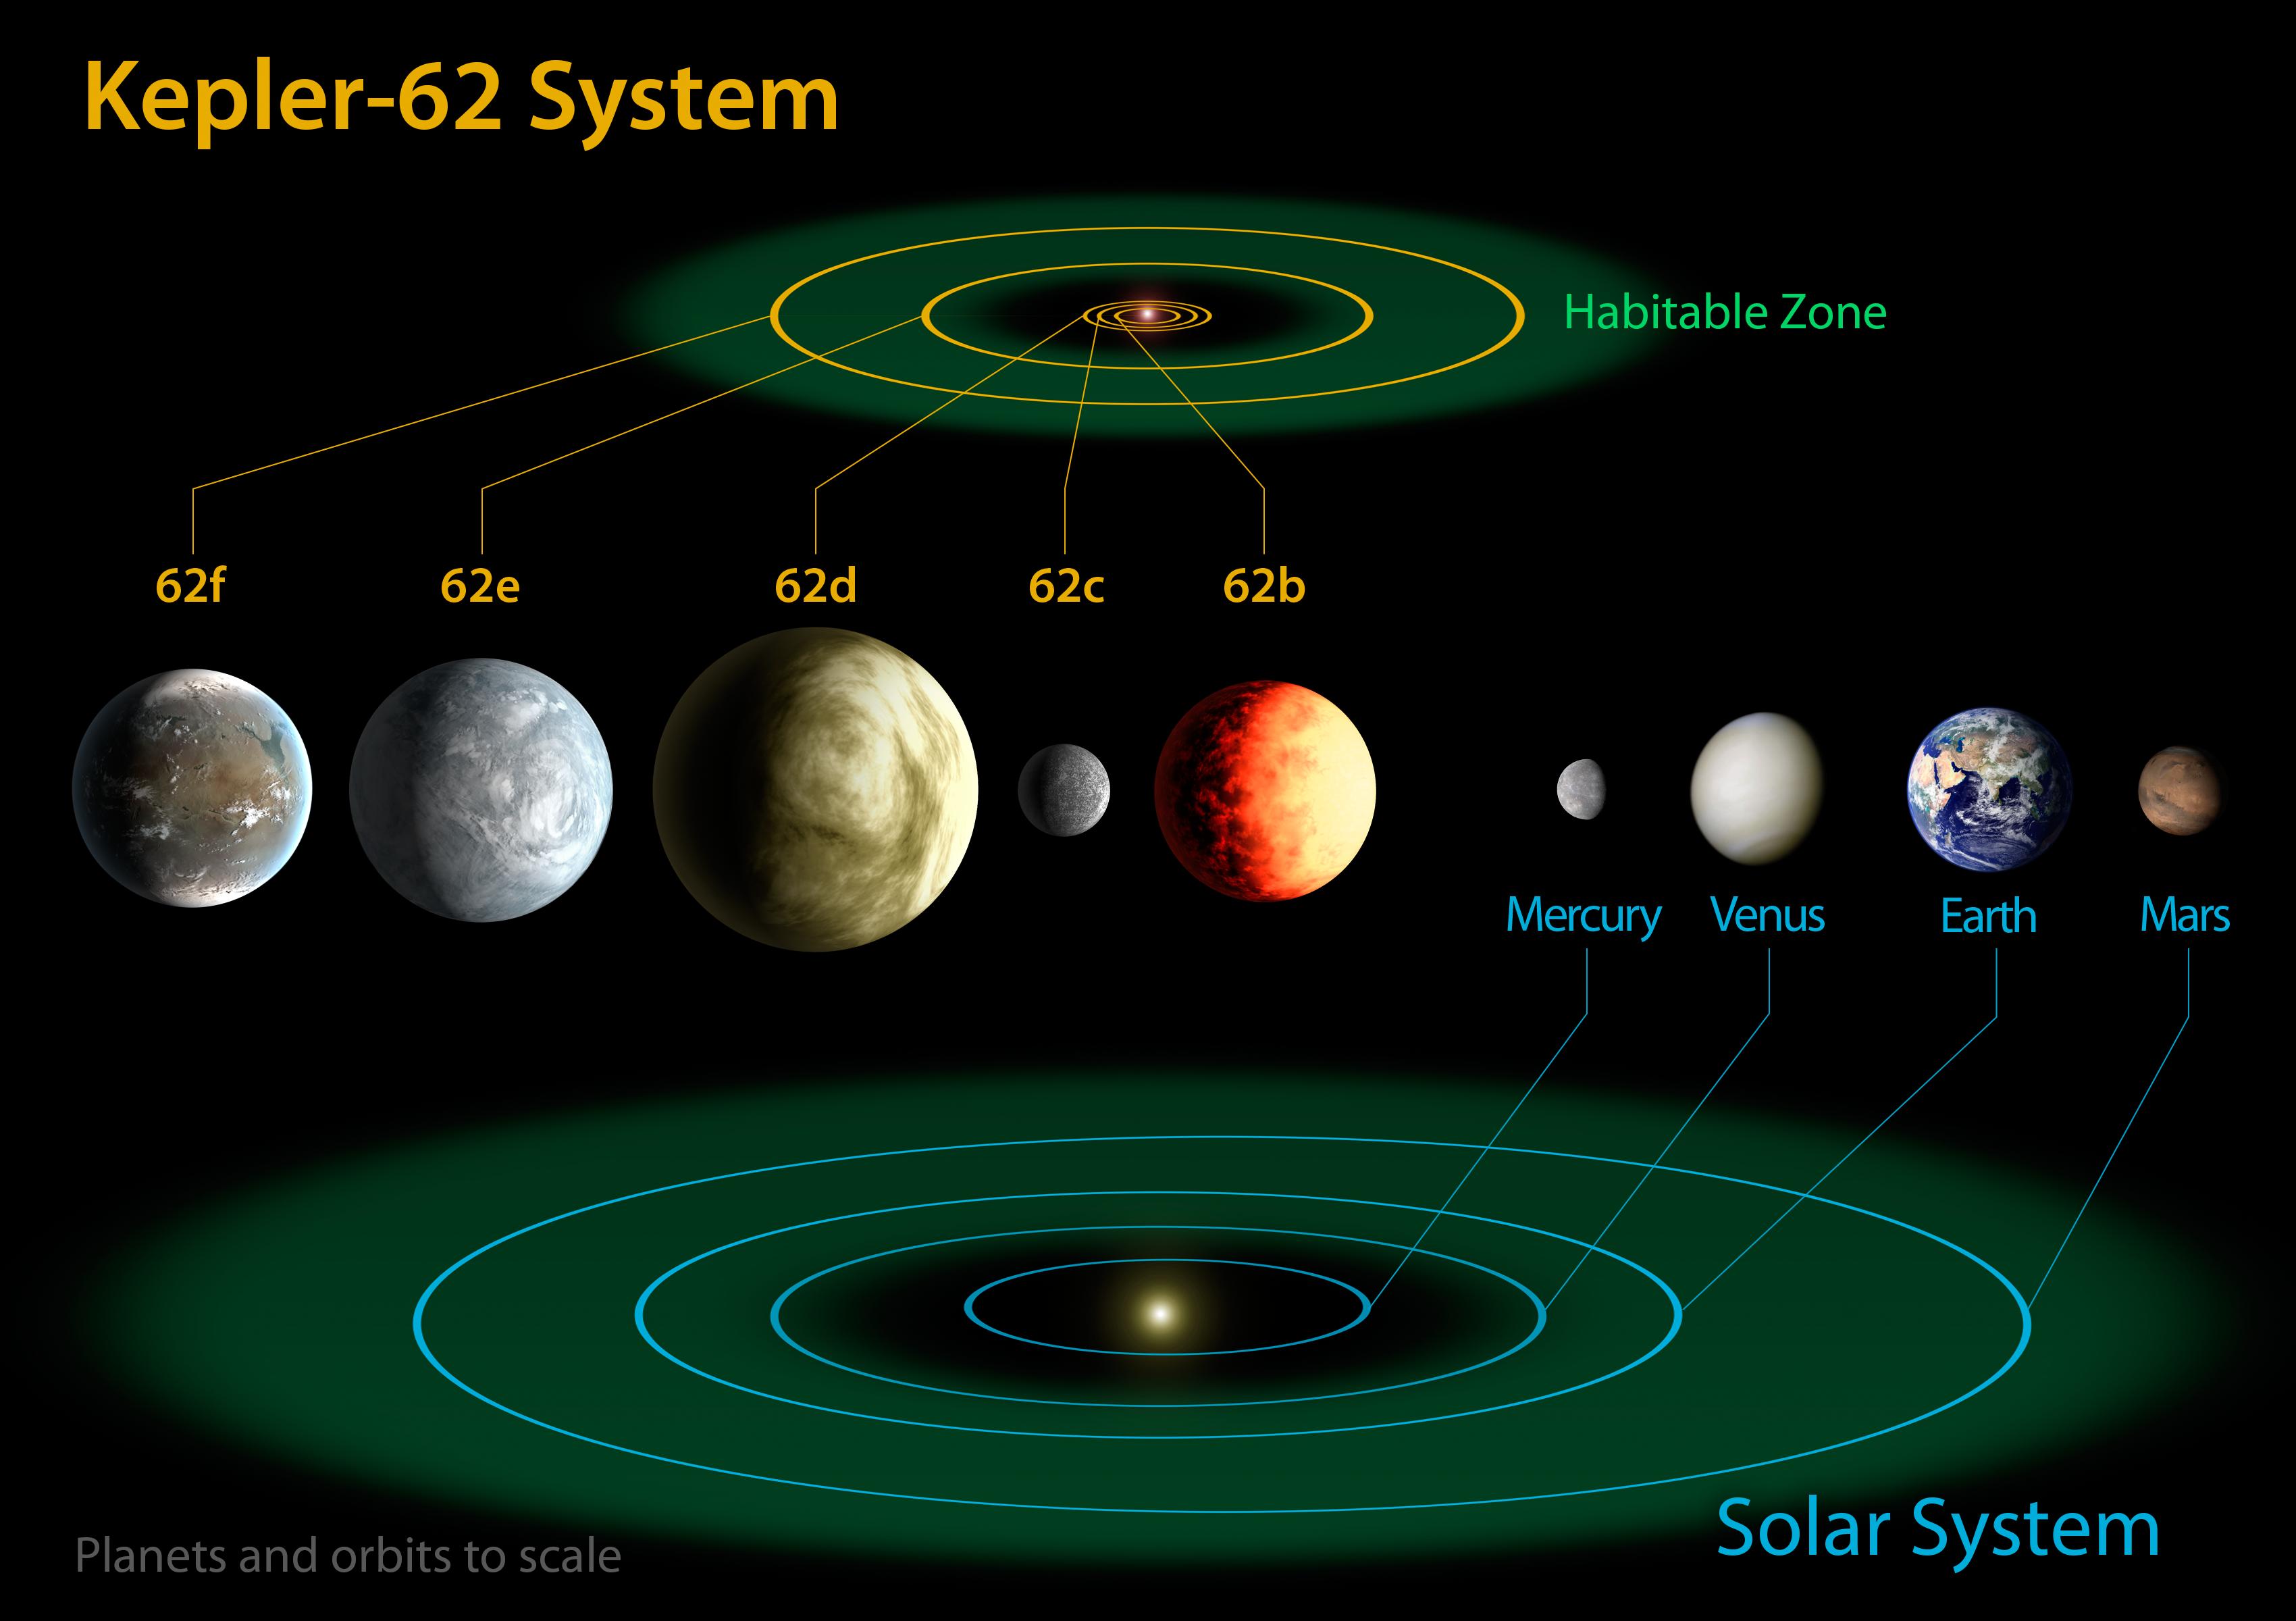 Kepler-62 and the Solar System